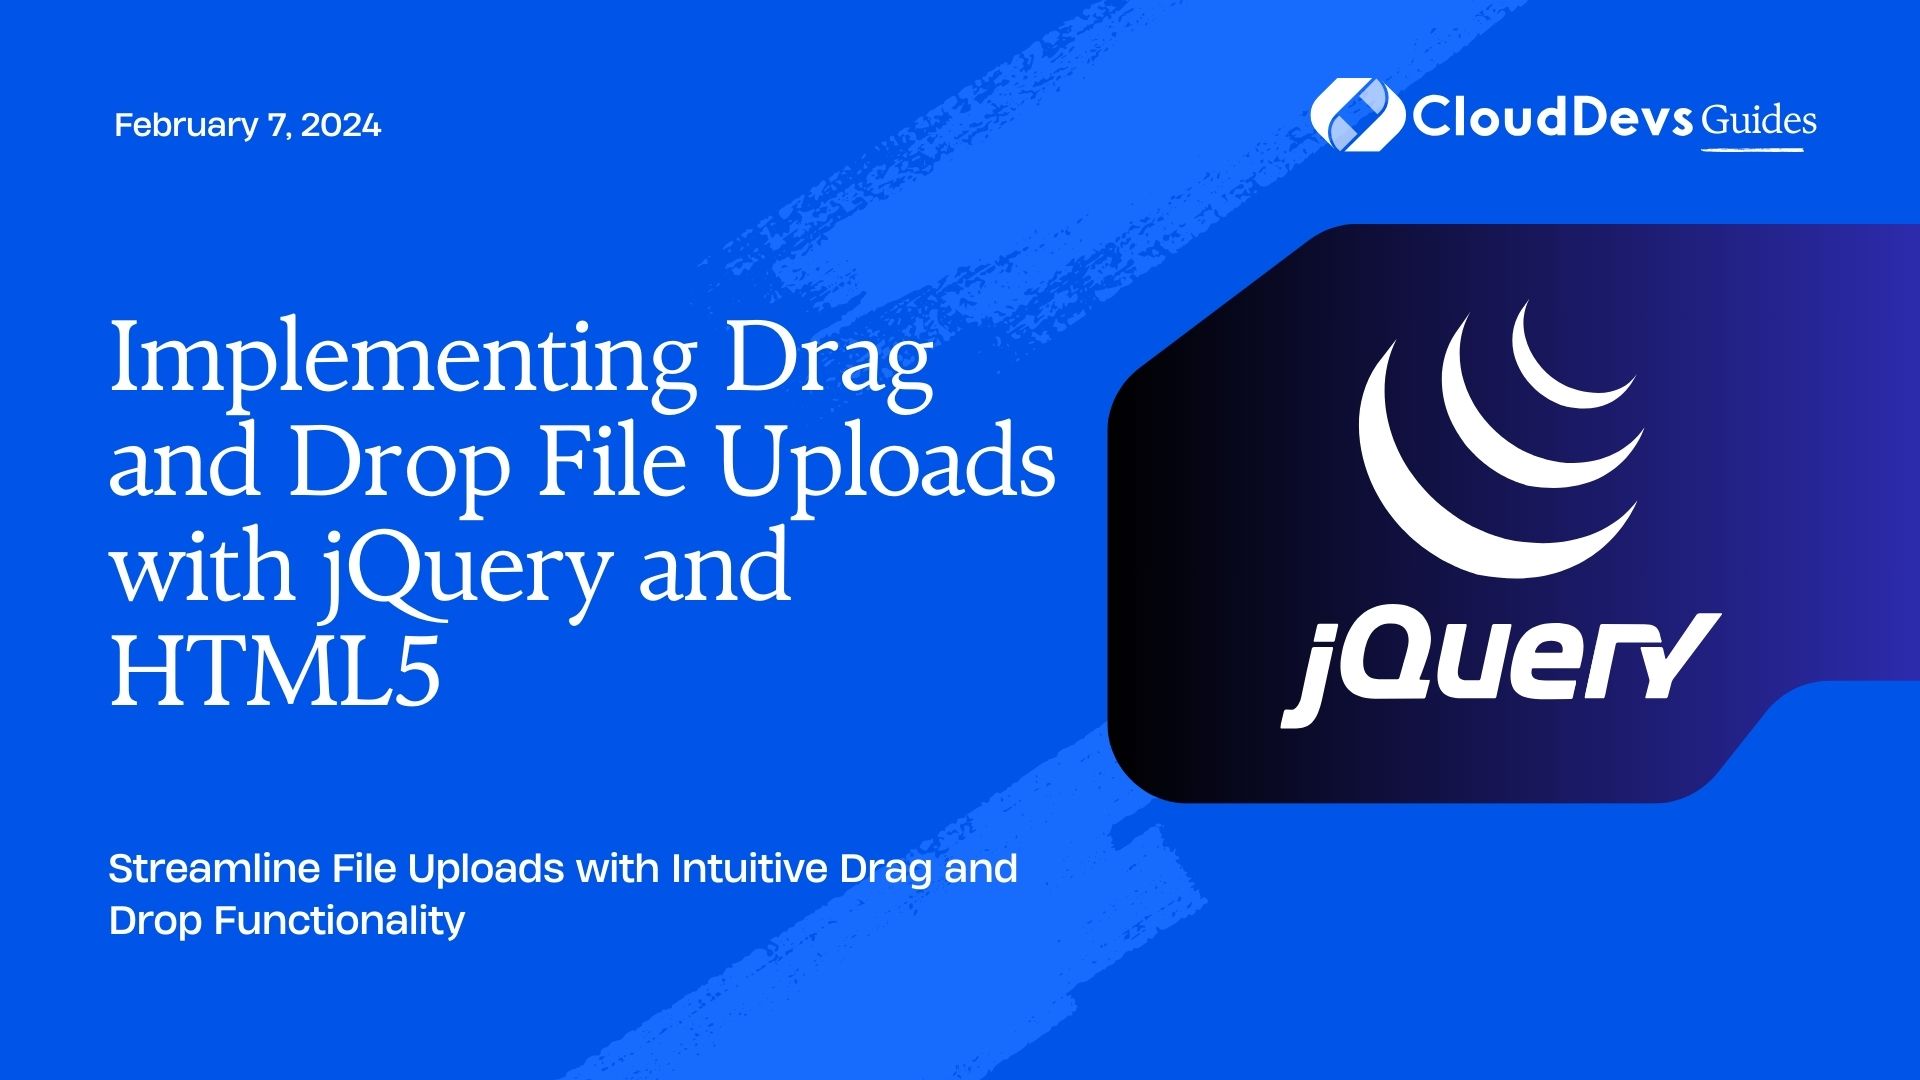 Implementing Drag and Drop File Uploads with jQuery and HTML5